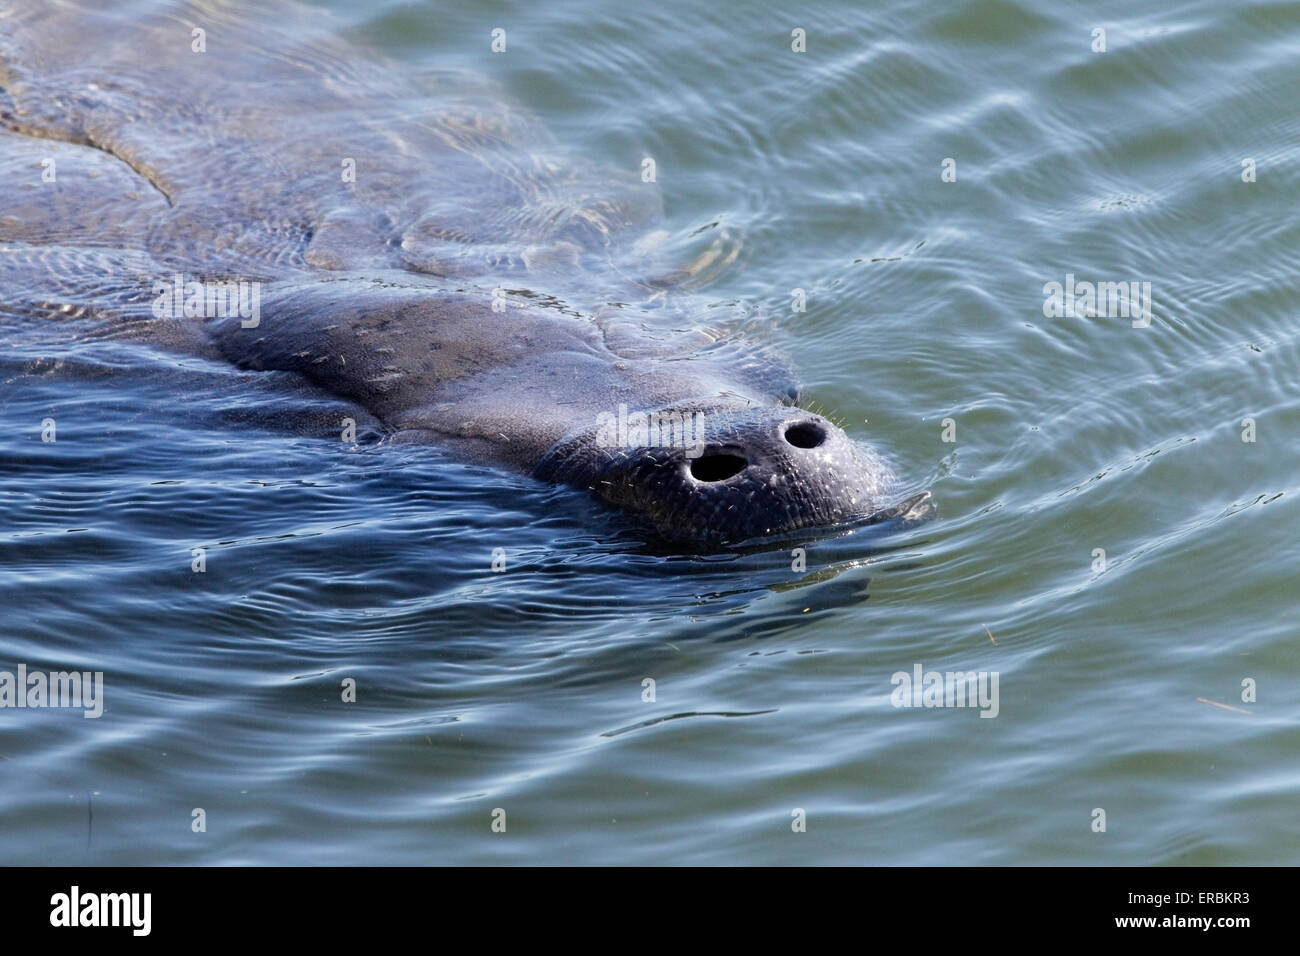 West Indian manatee (Trichechus manatus) adult swimming in water at surface, Florida, USA Stock Photo